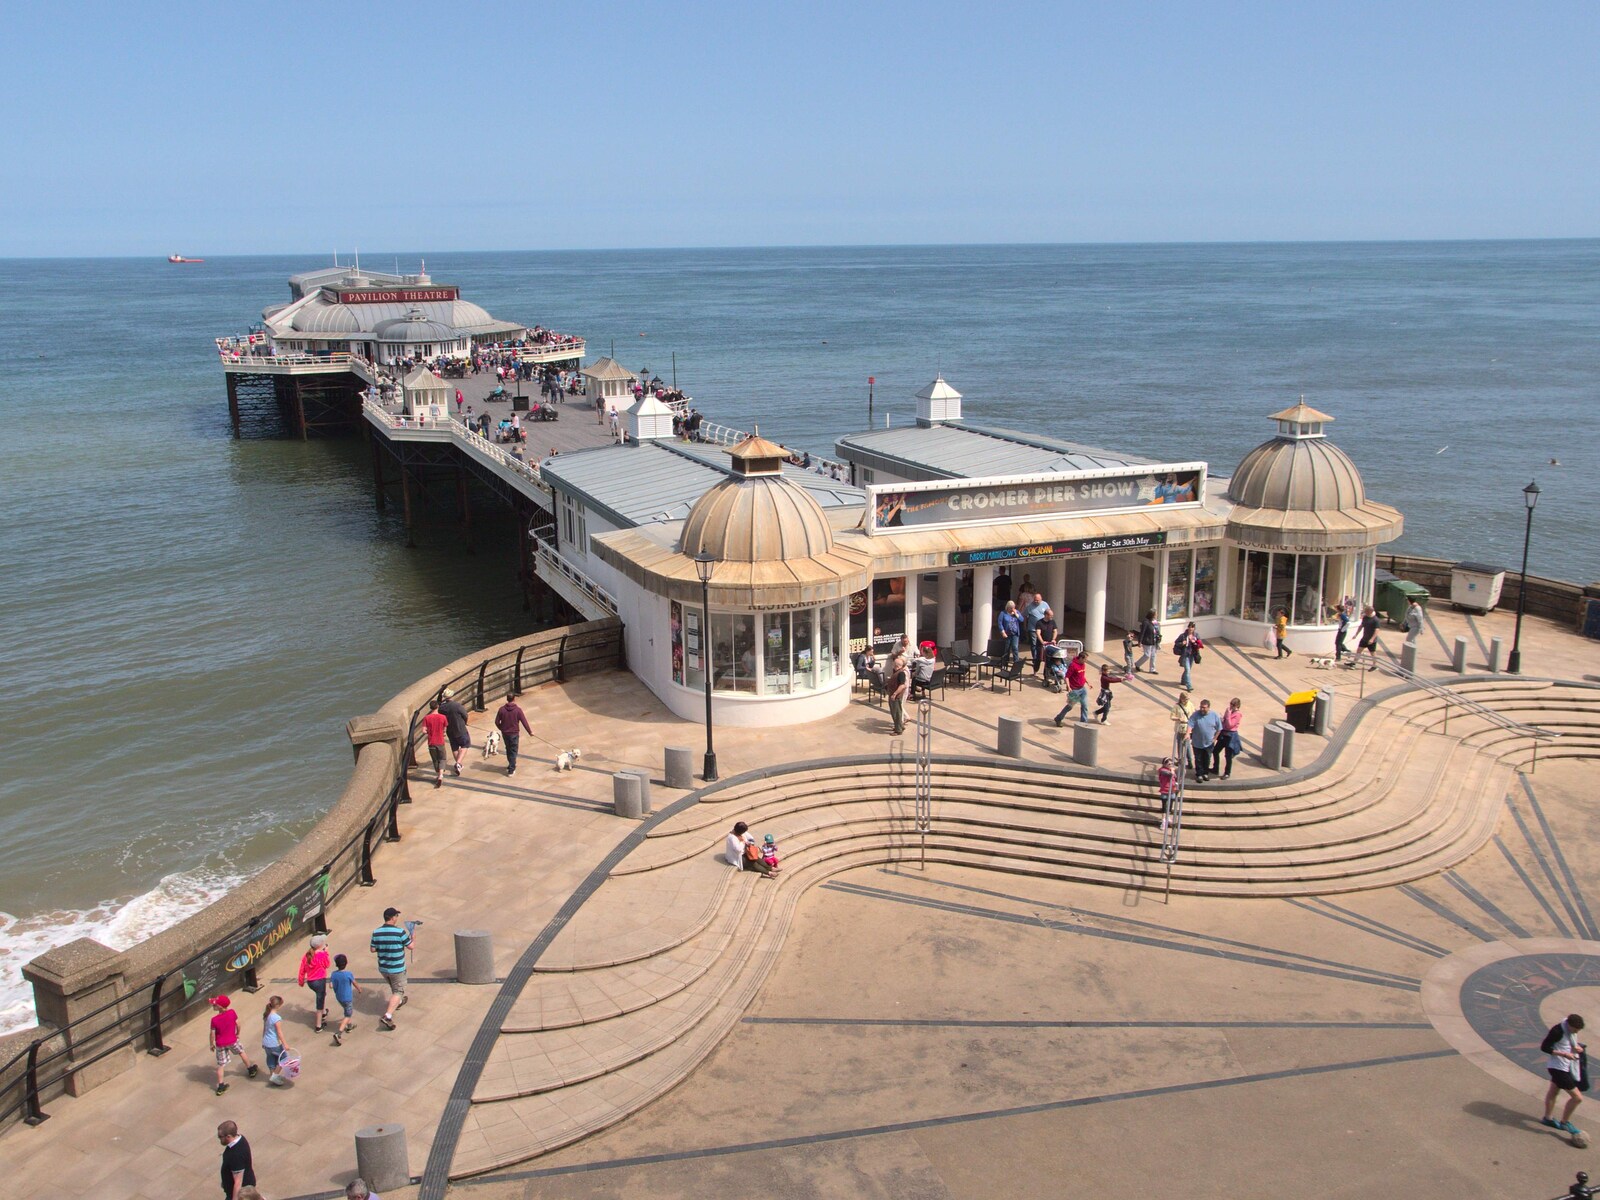 Cromer pier from A Birthday Camping Trip, East Runton, North Norfolk - 26th May 2015